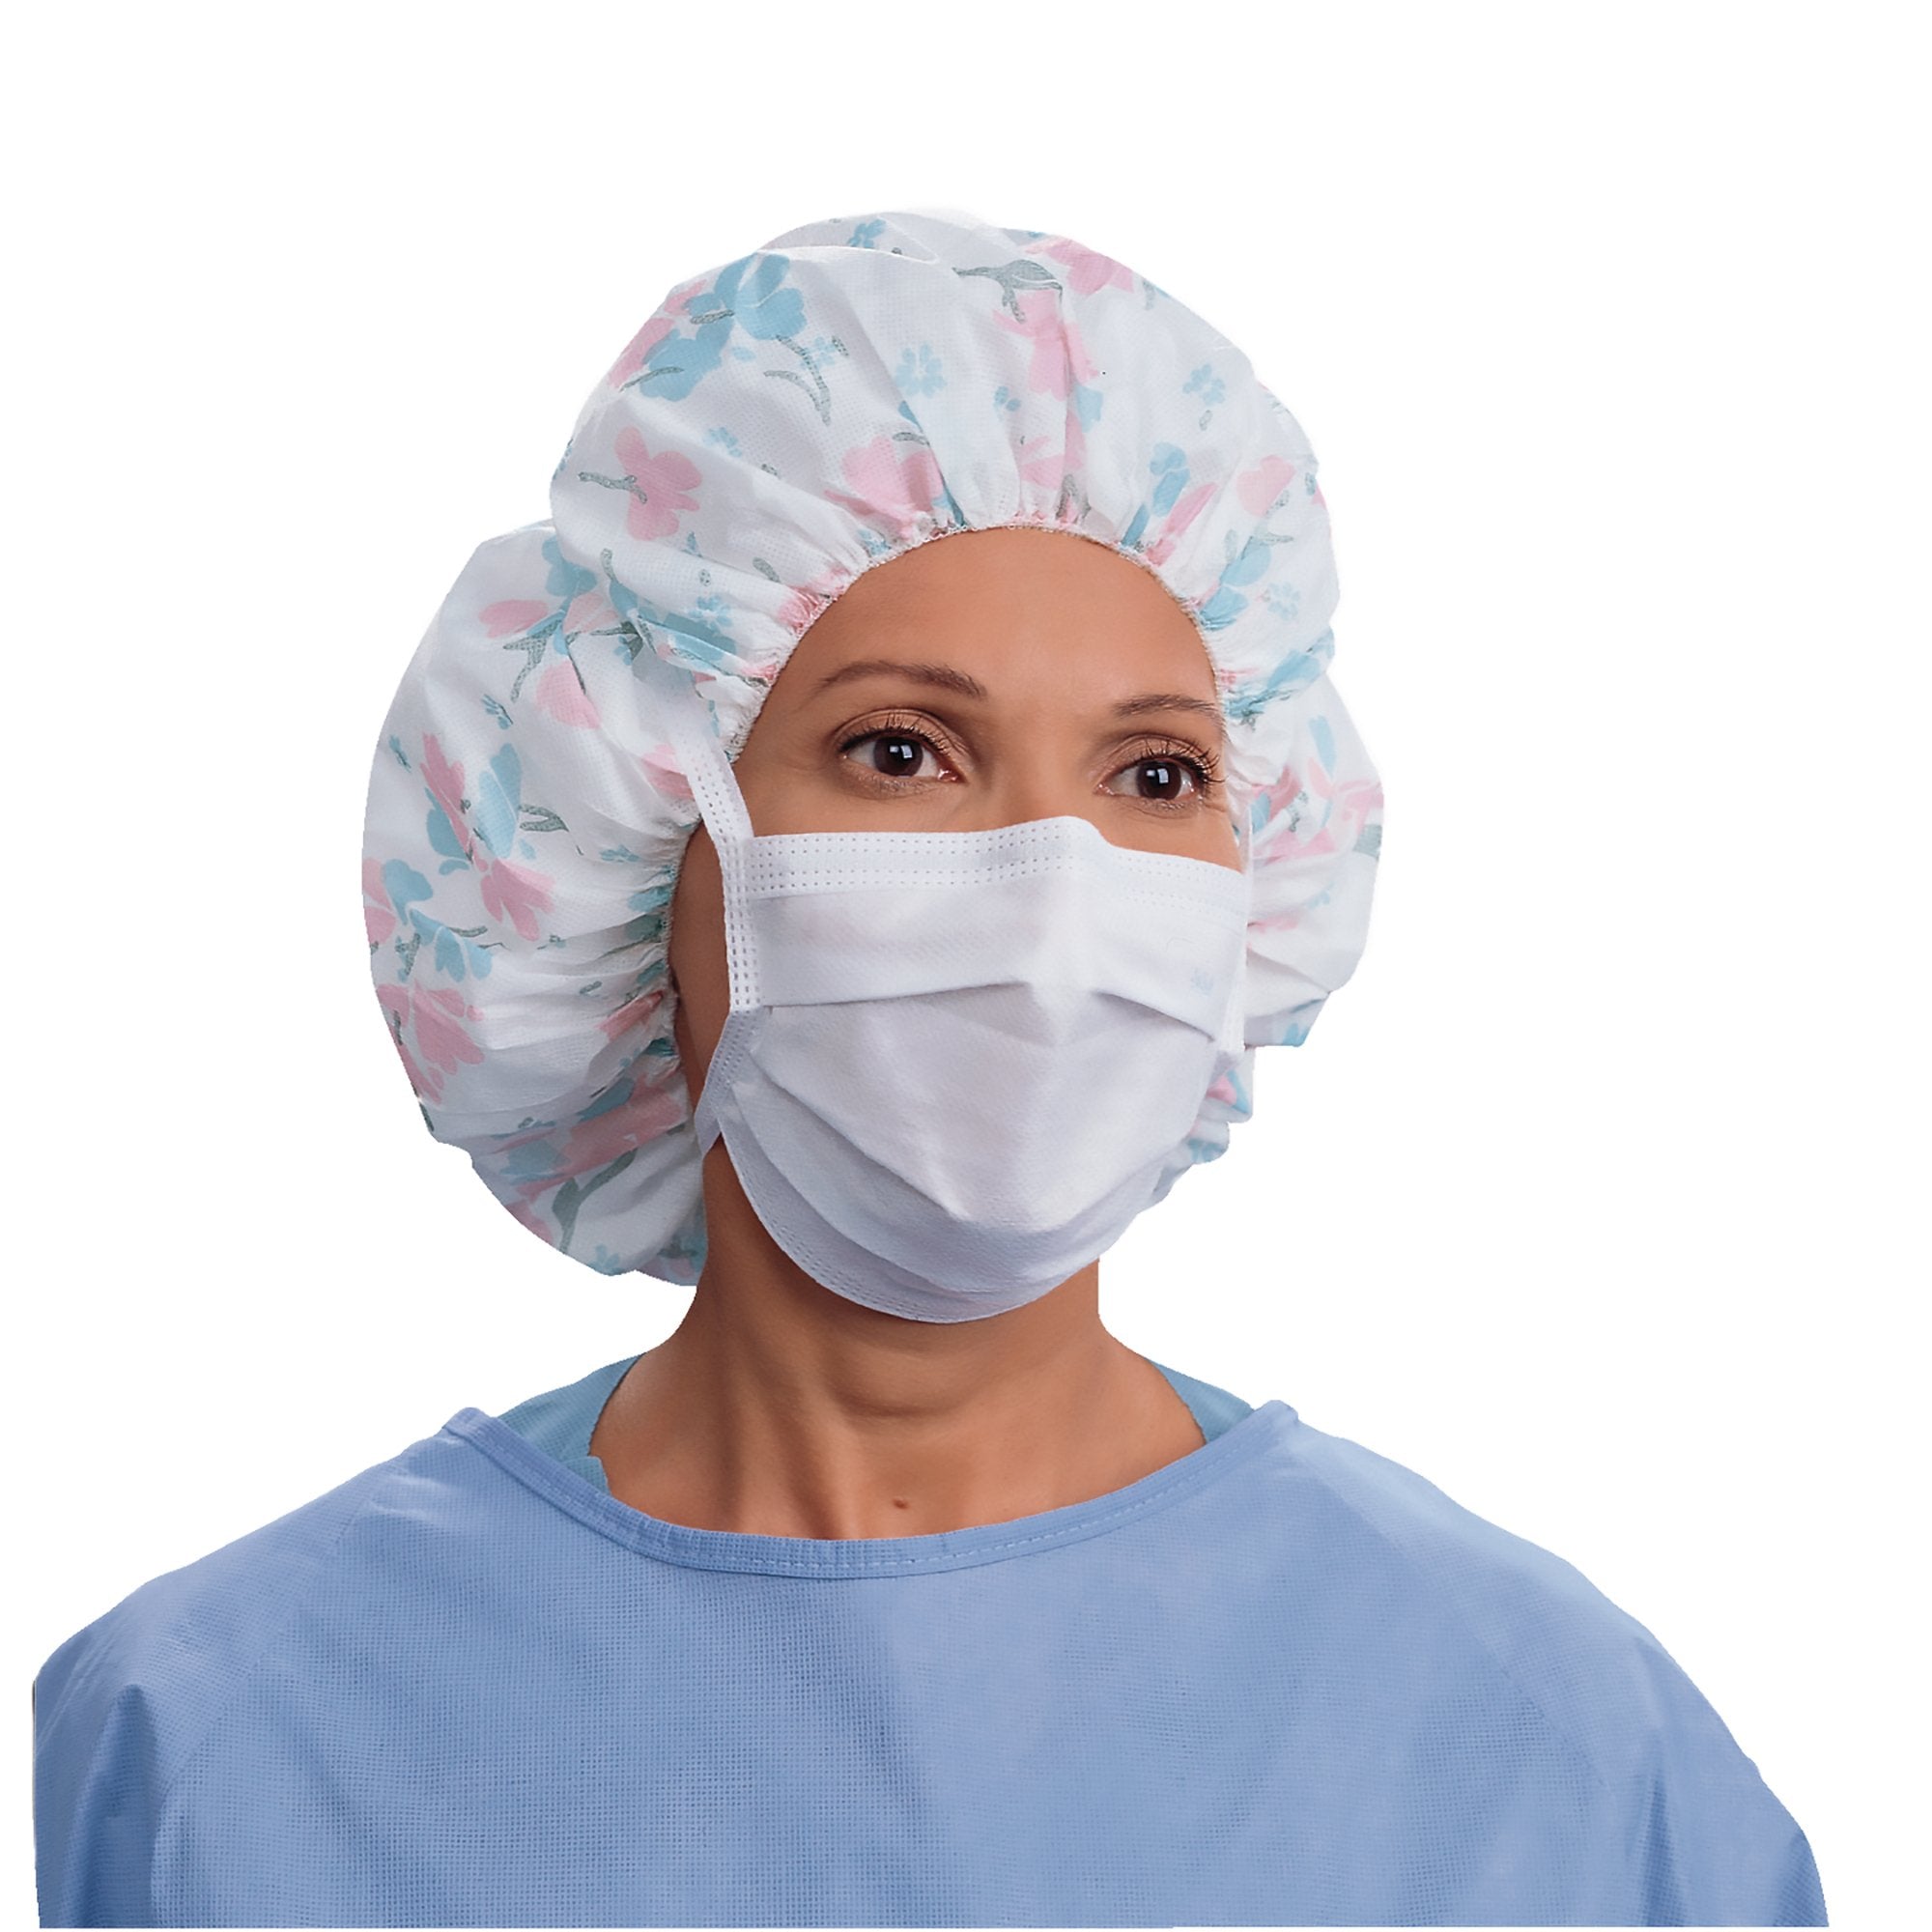 Surgical Mask Halyard Pleated Tie Closure One Size Fits Most White NonSterile Not Rated Adult